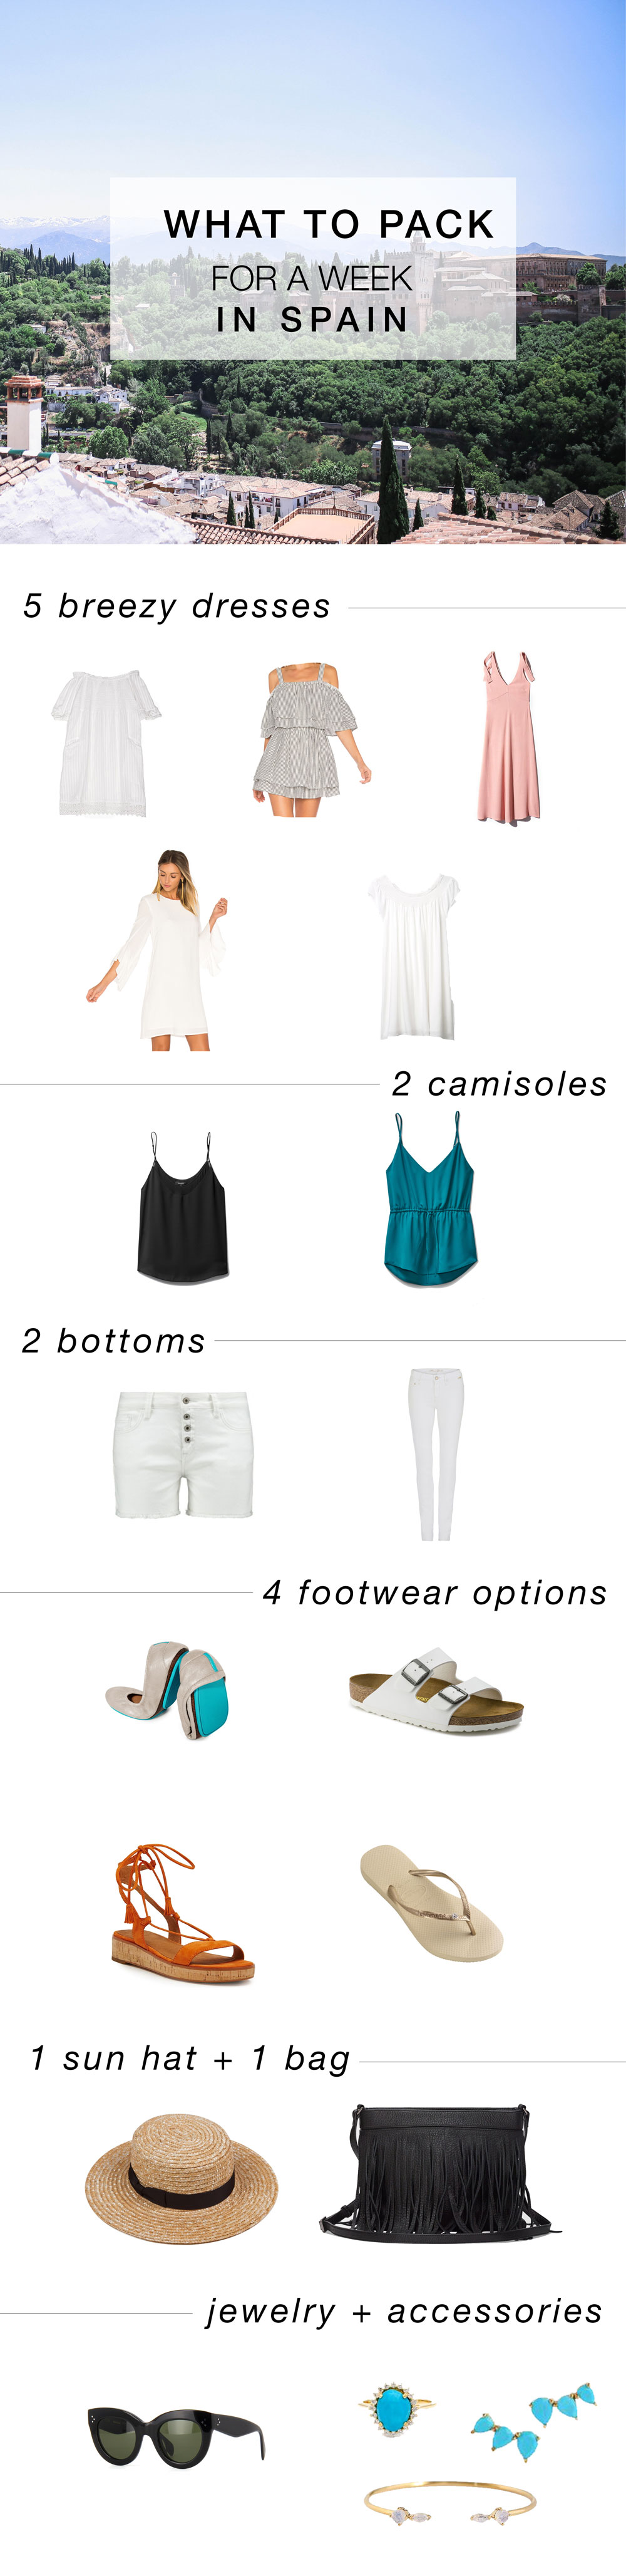 What to pack for spain, printable spain carry on packing list, spain carry on packing list, spain packing list, what to wear in spain, summer spain packing list by To Vogue or Bust